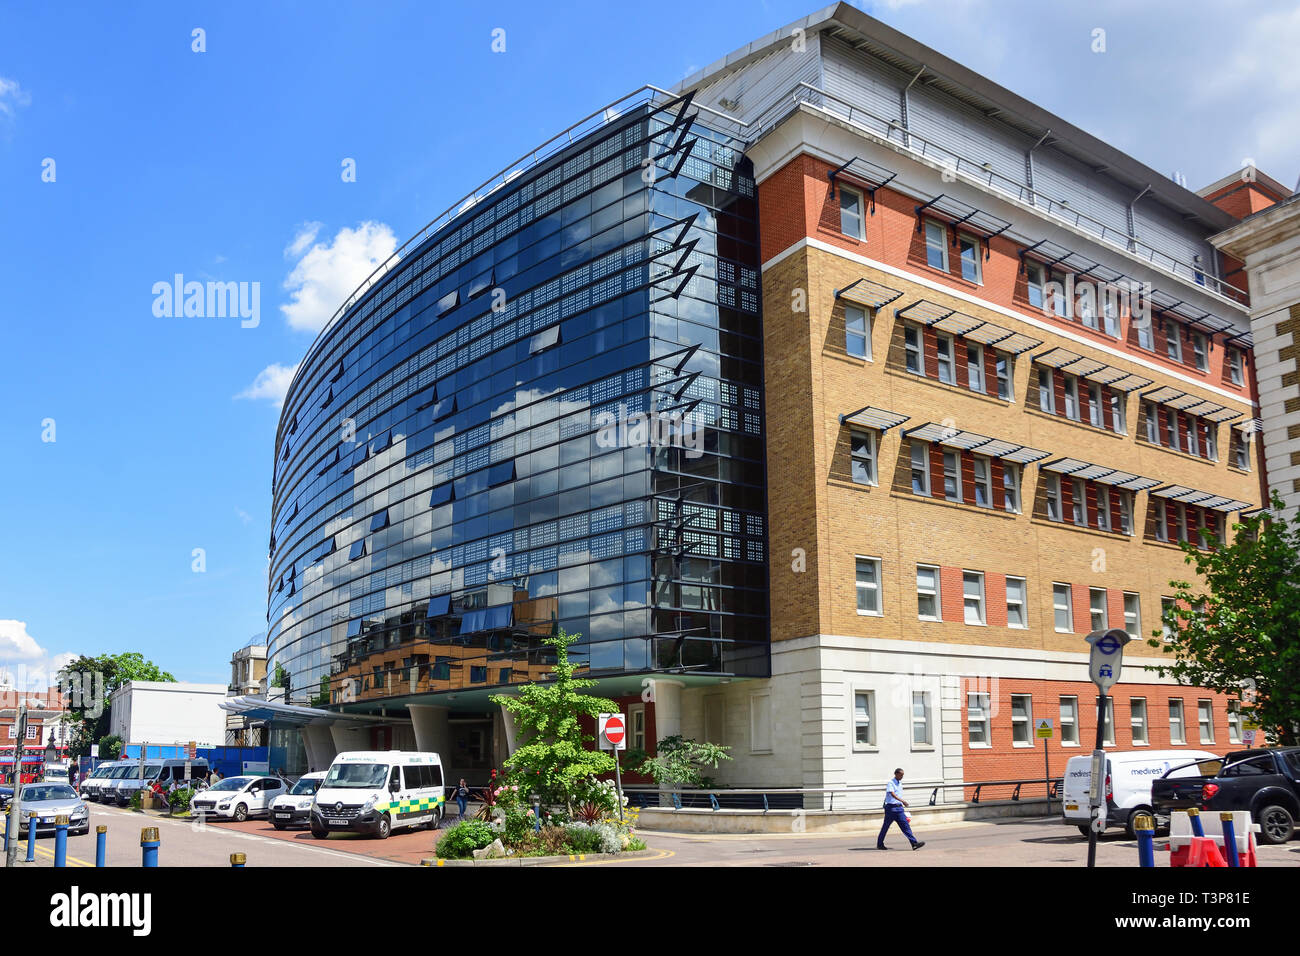 Entrance to Golden Jubilee Wing at King's College Hospital, Denmark Hill,  Camberwell, London Borough of Southwark, London, England, United Kingdom  Stock Photo - Alamy